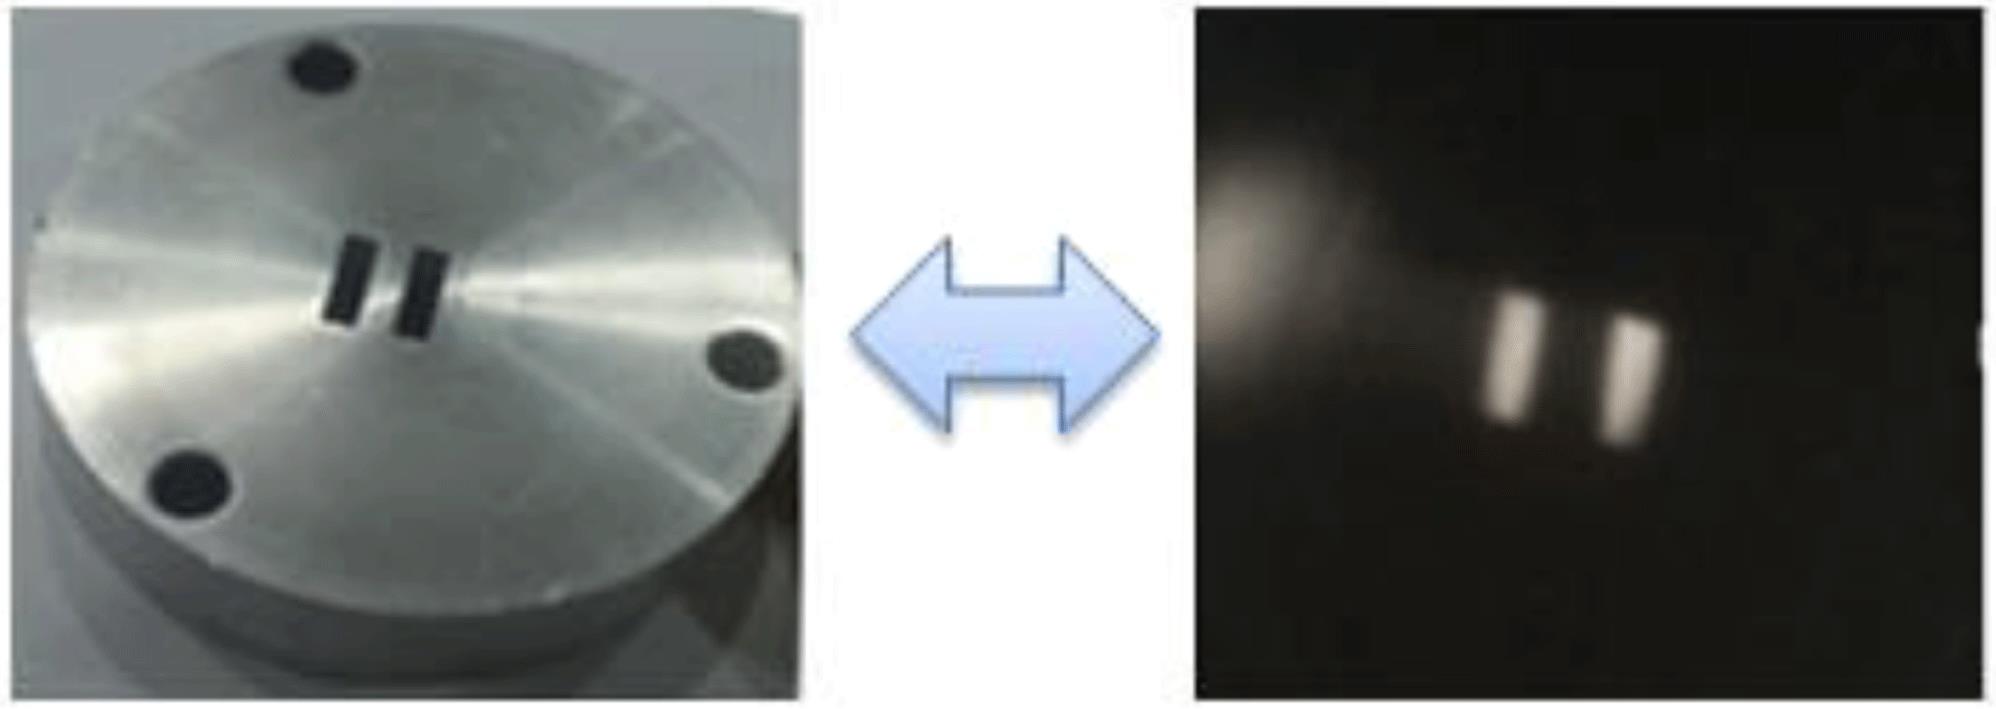 A radiographic image (right) of a static object (left) by the method of magnetic imaging radiography.